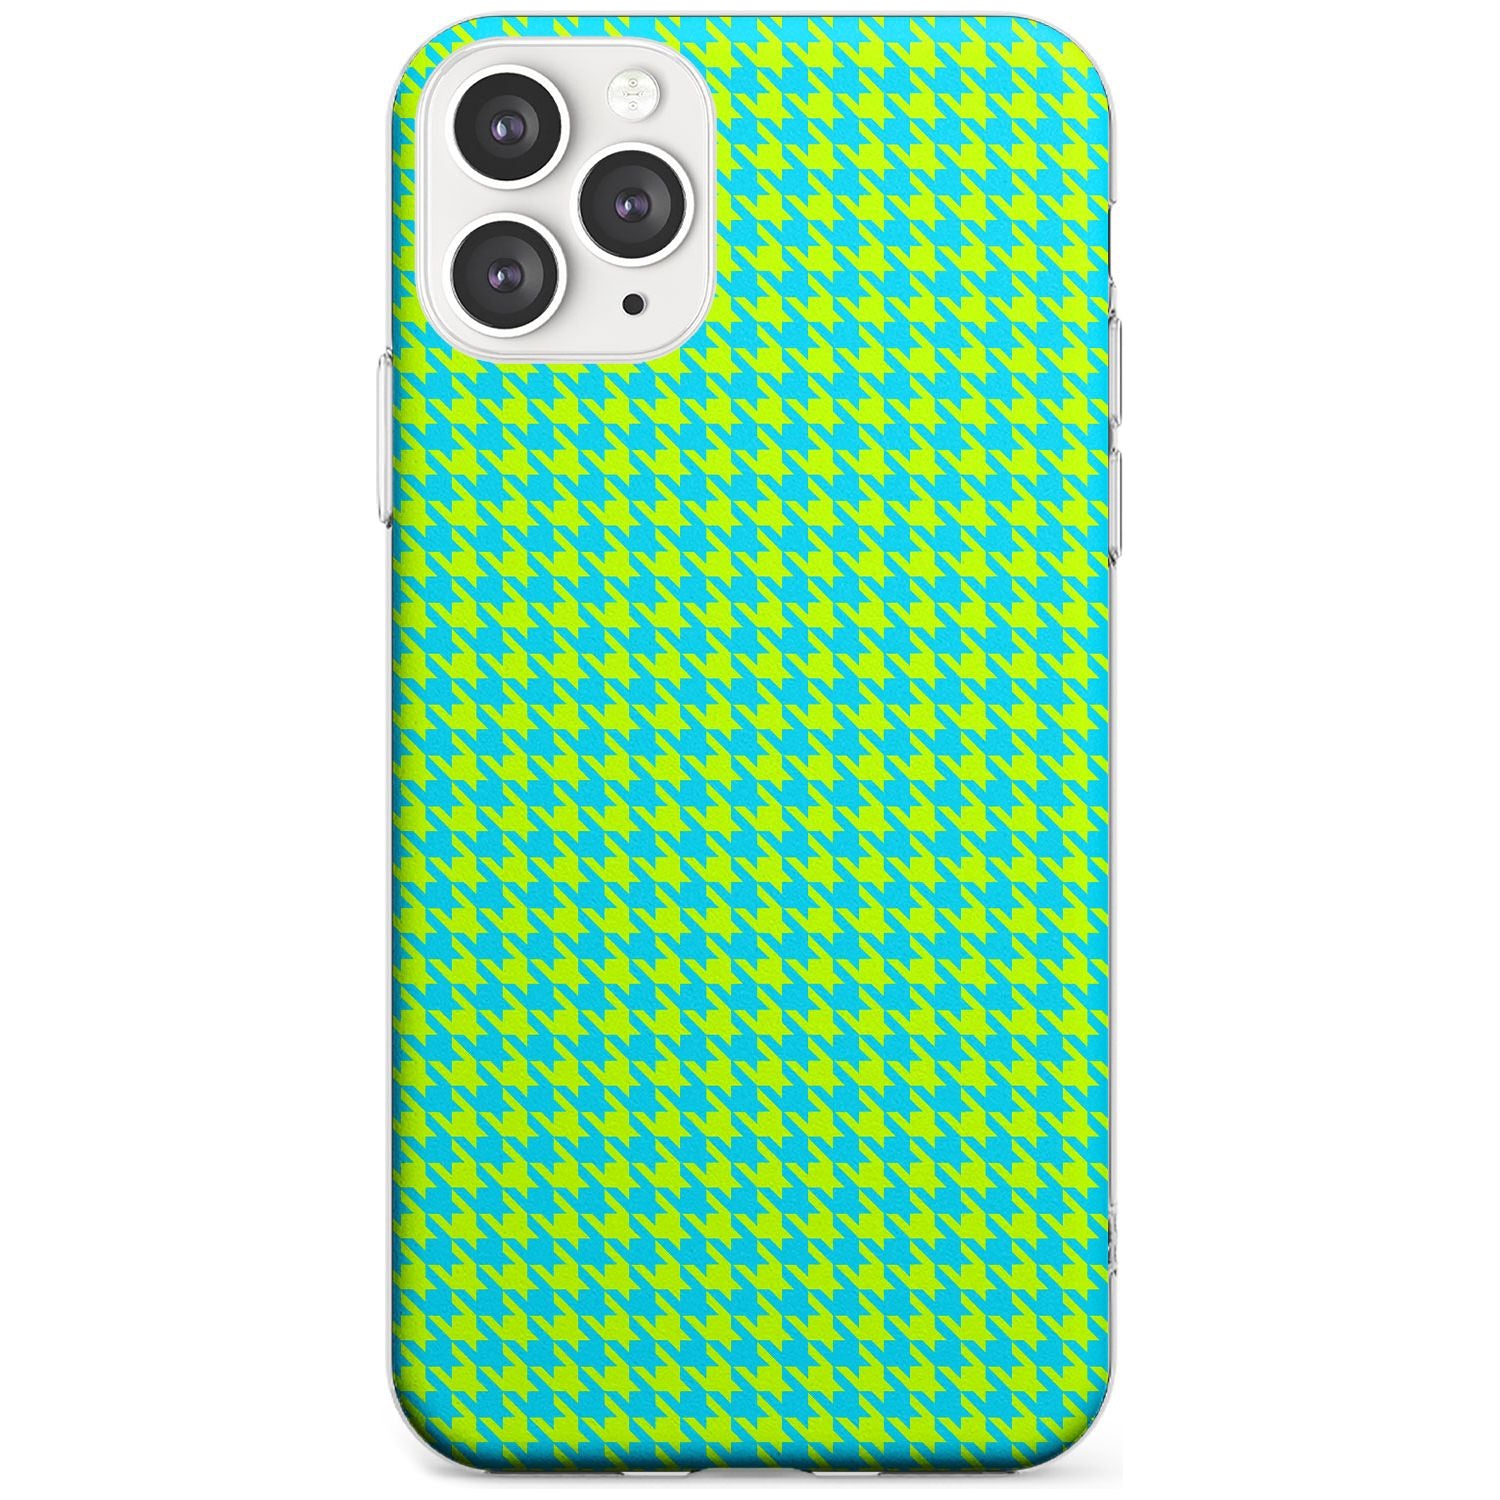 Neon Lime & Turquoise Houndstooth Pattern Slim TPU Phone Case for iPhone 11 Pro Max